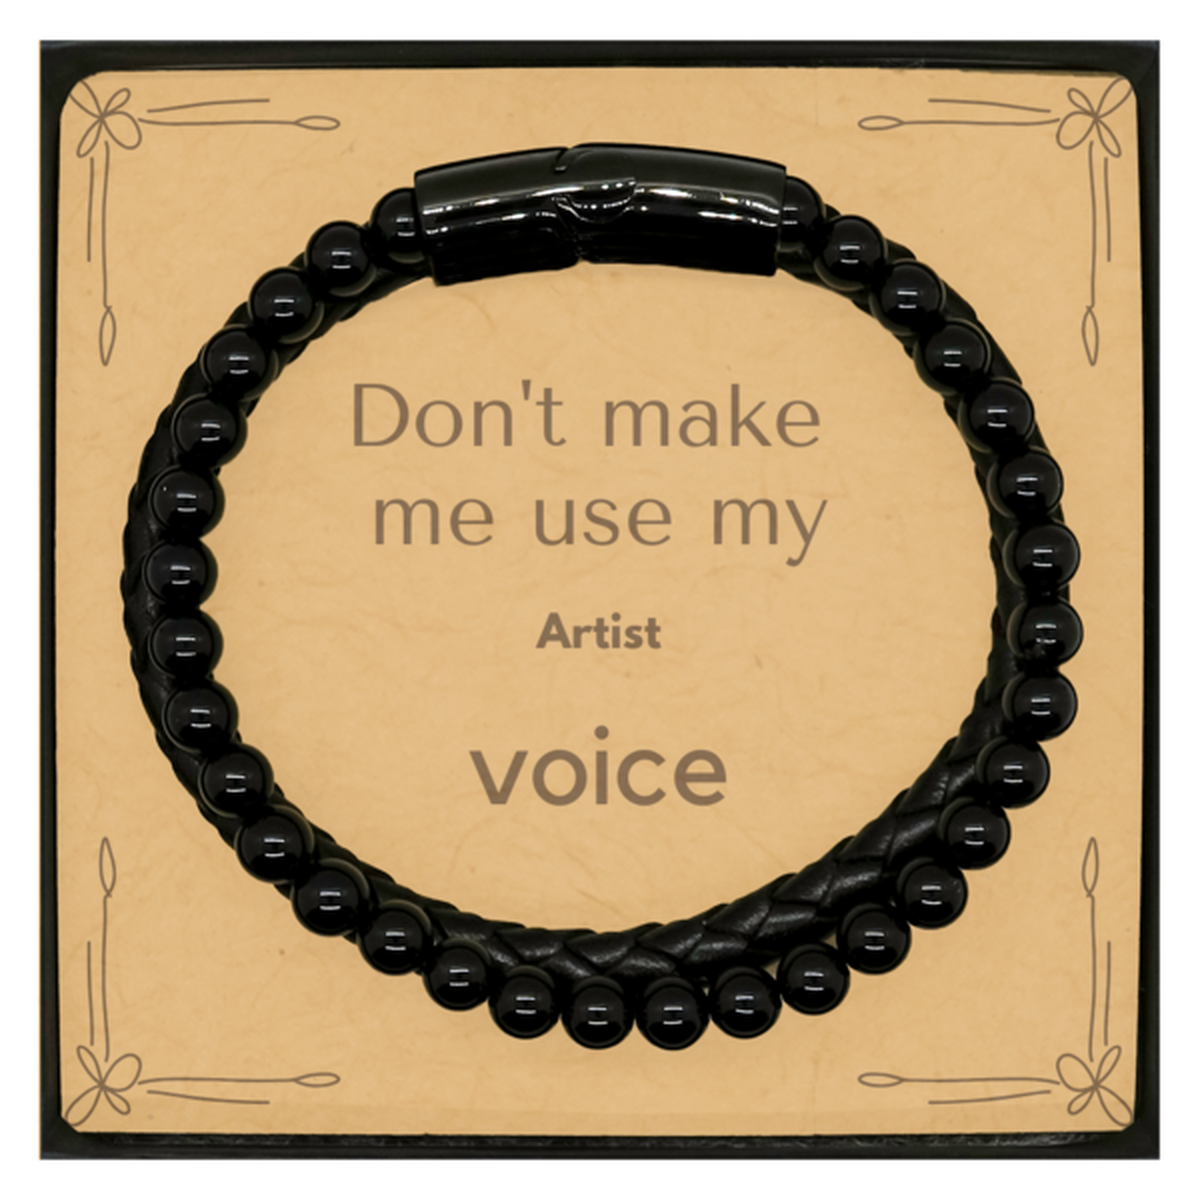 Don't make me use my Artist voice, Sarcasm Artist Card Gifts, Christmas Artist Stone Leather Bracelets Birthday Unique Gifts For Artist Coworkers, Men, Women, Colleague, Friends